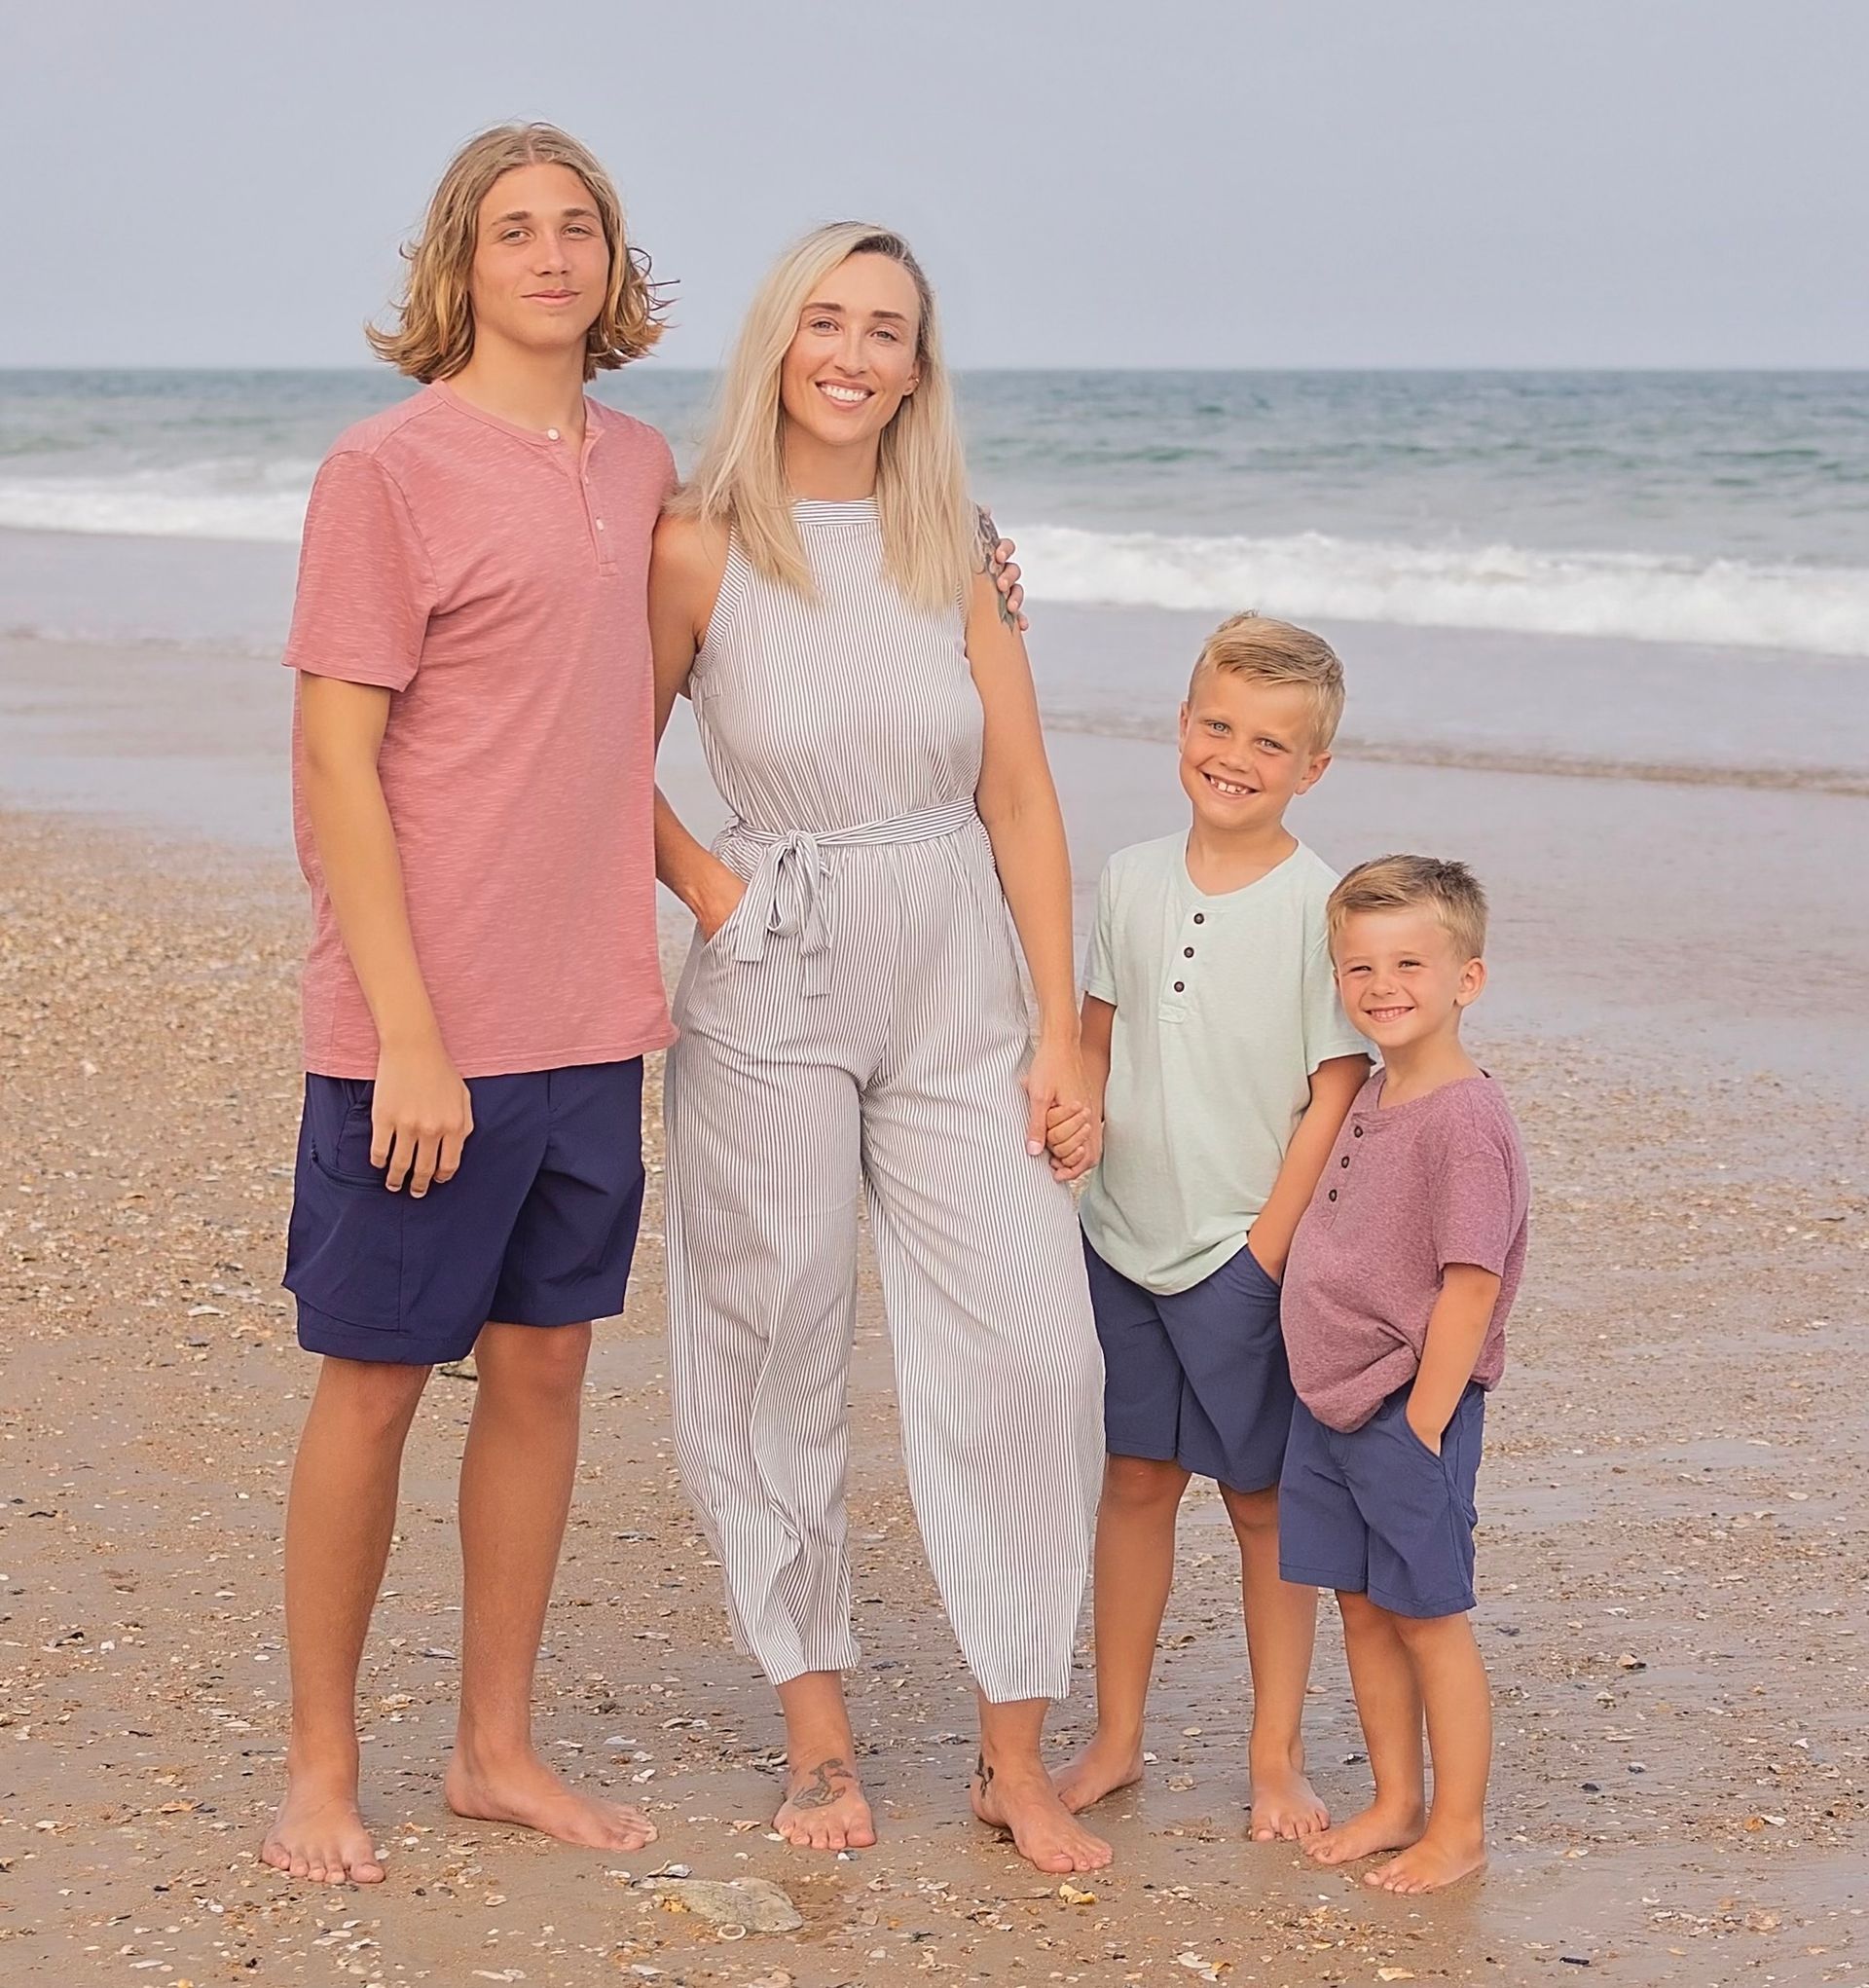 jessica ivey fnp-bc and her 3 children at the beach